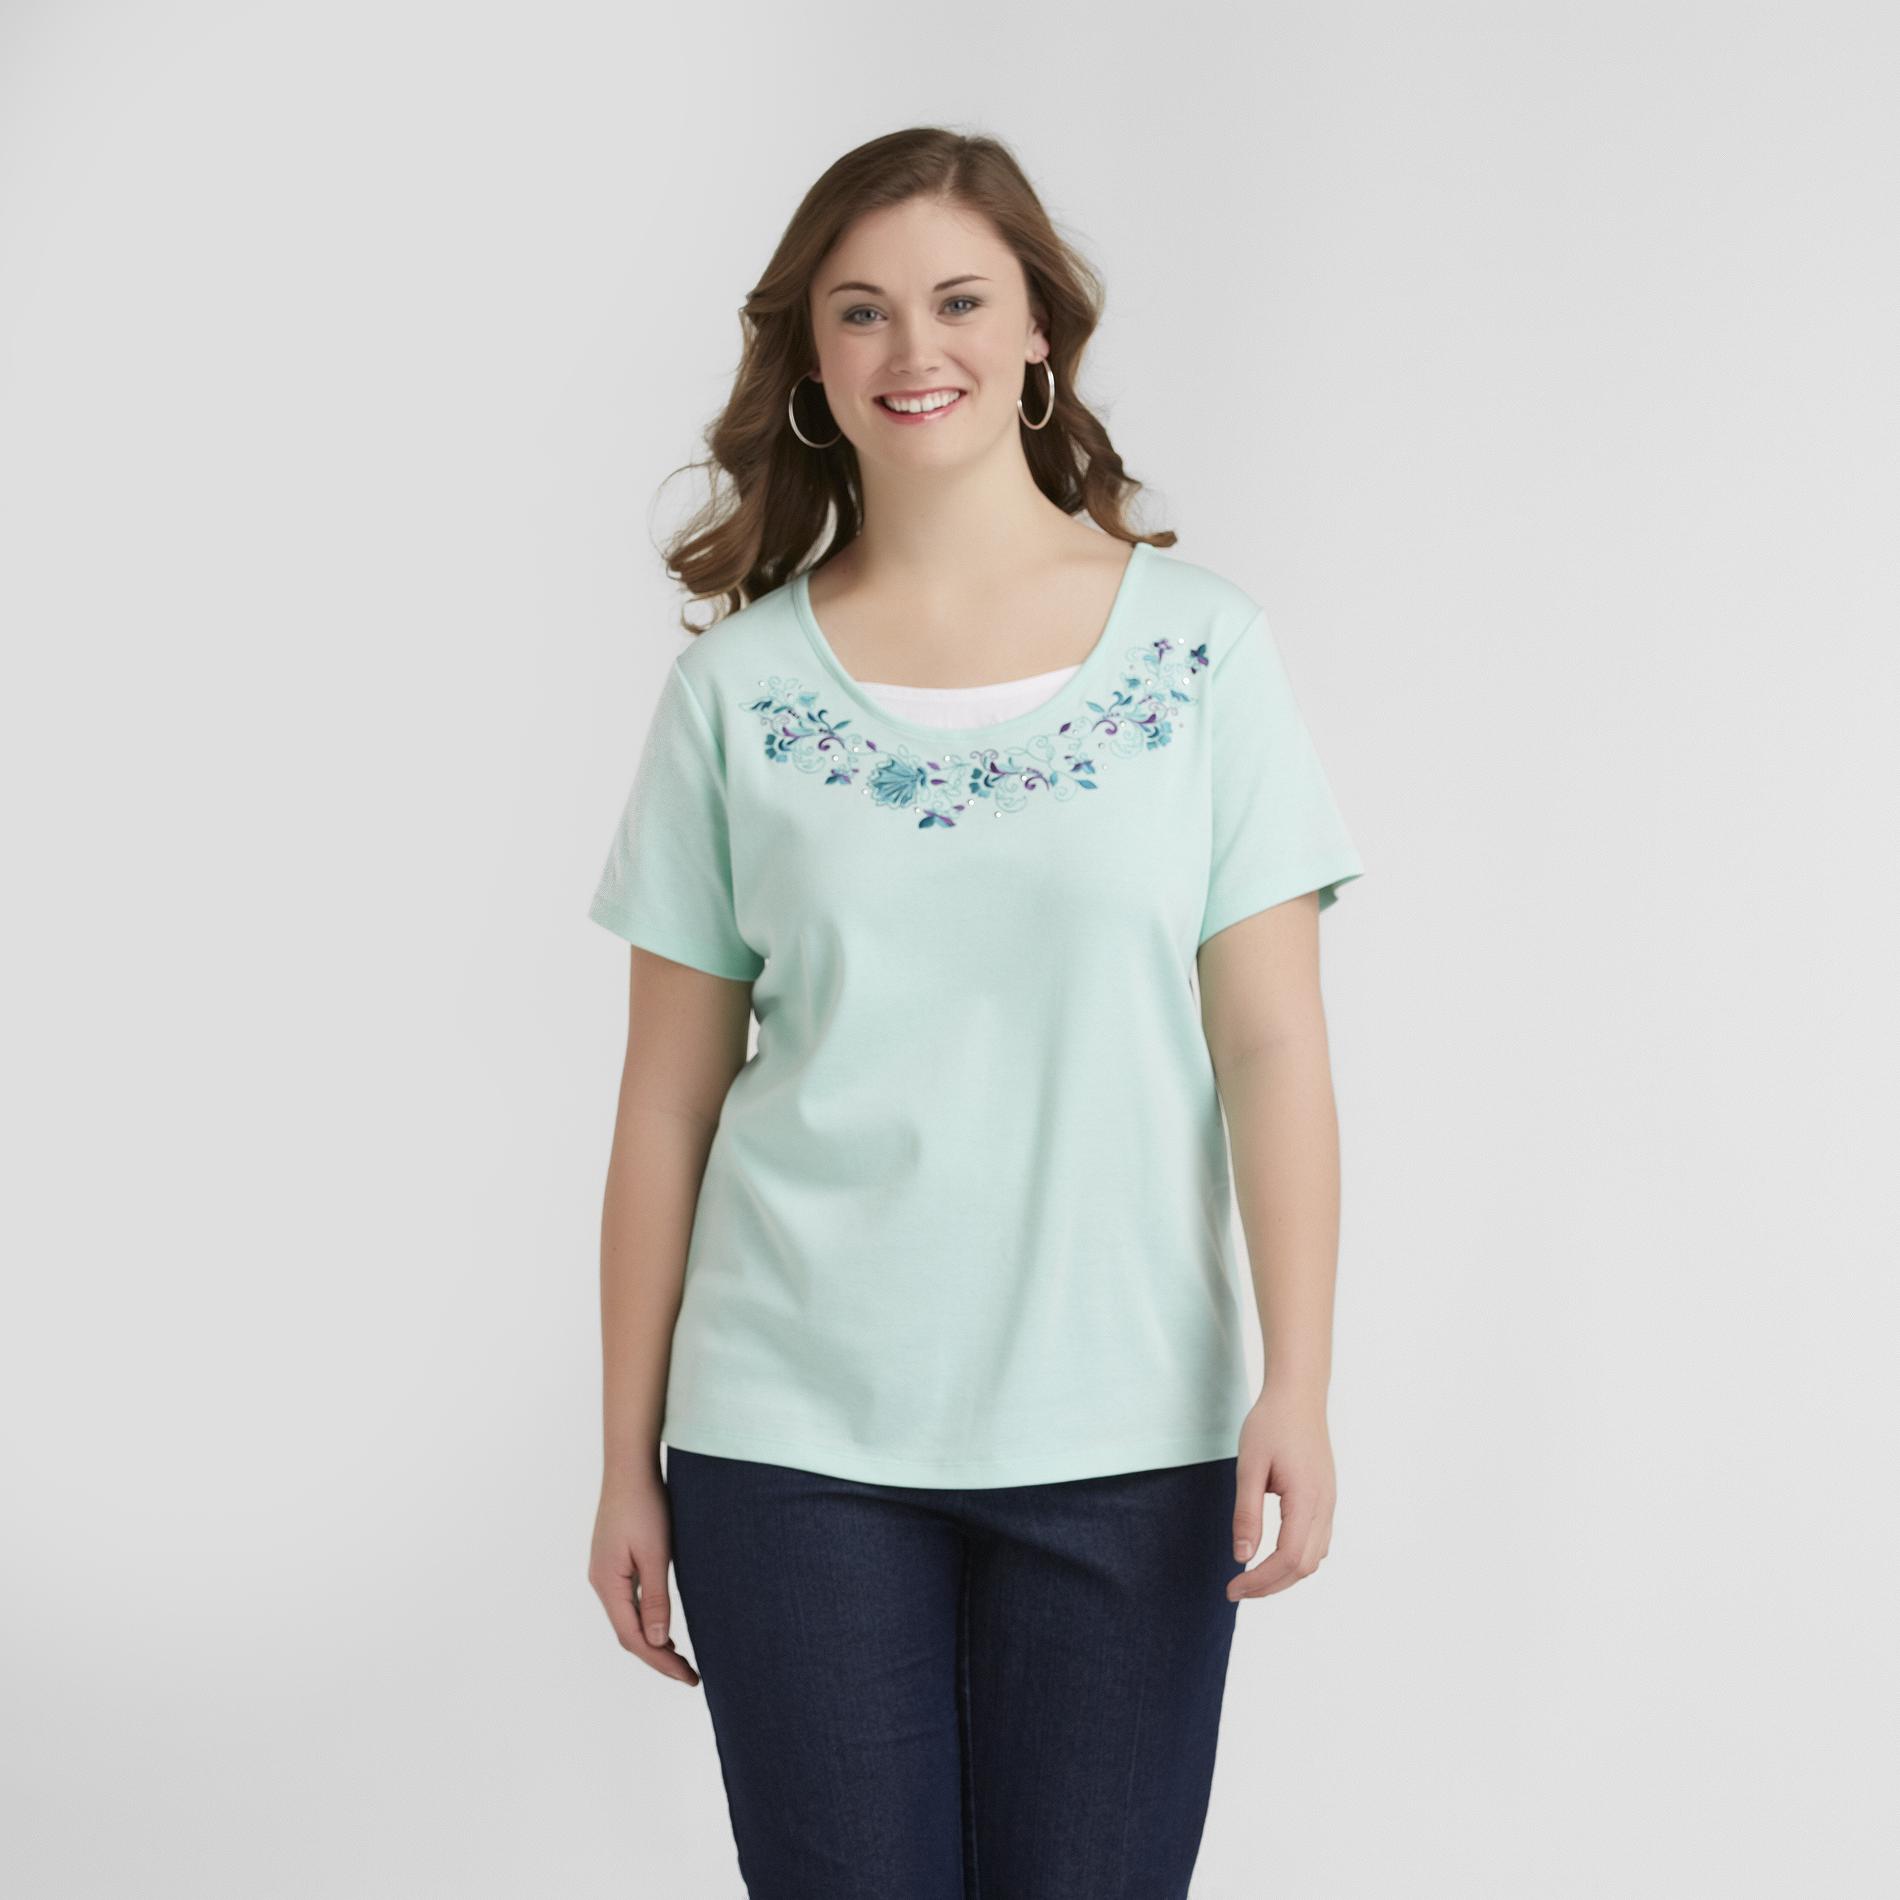 Basic Editions Women's Plus Layered Top - Floral